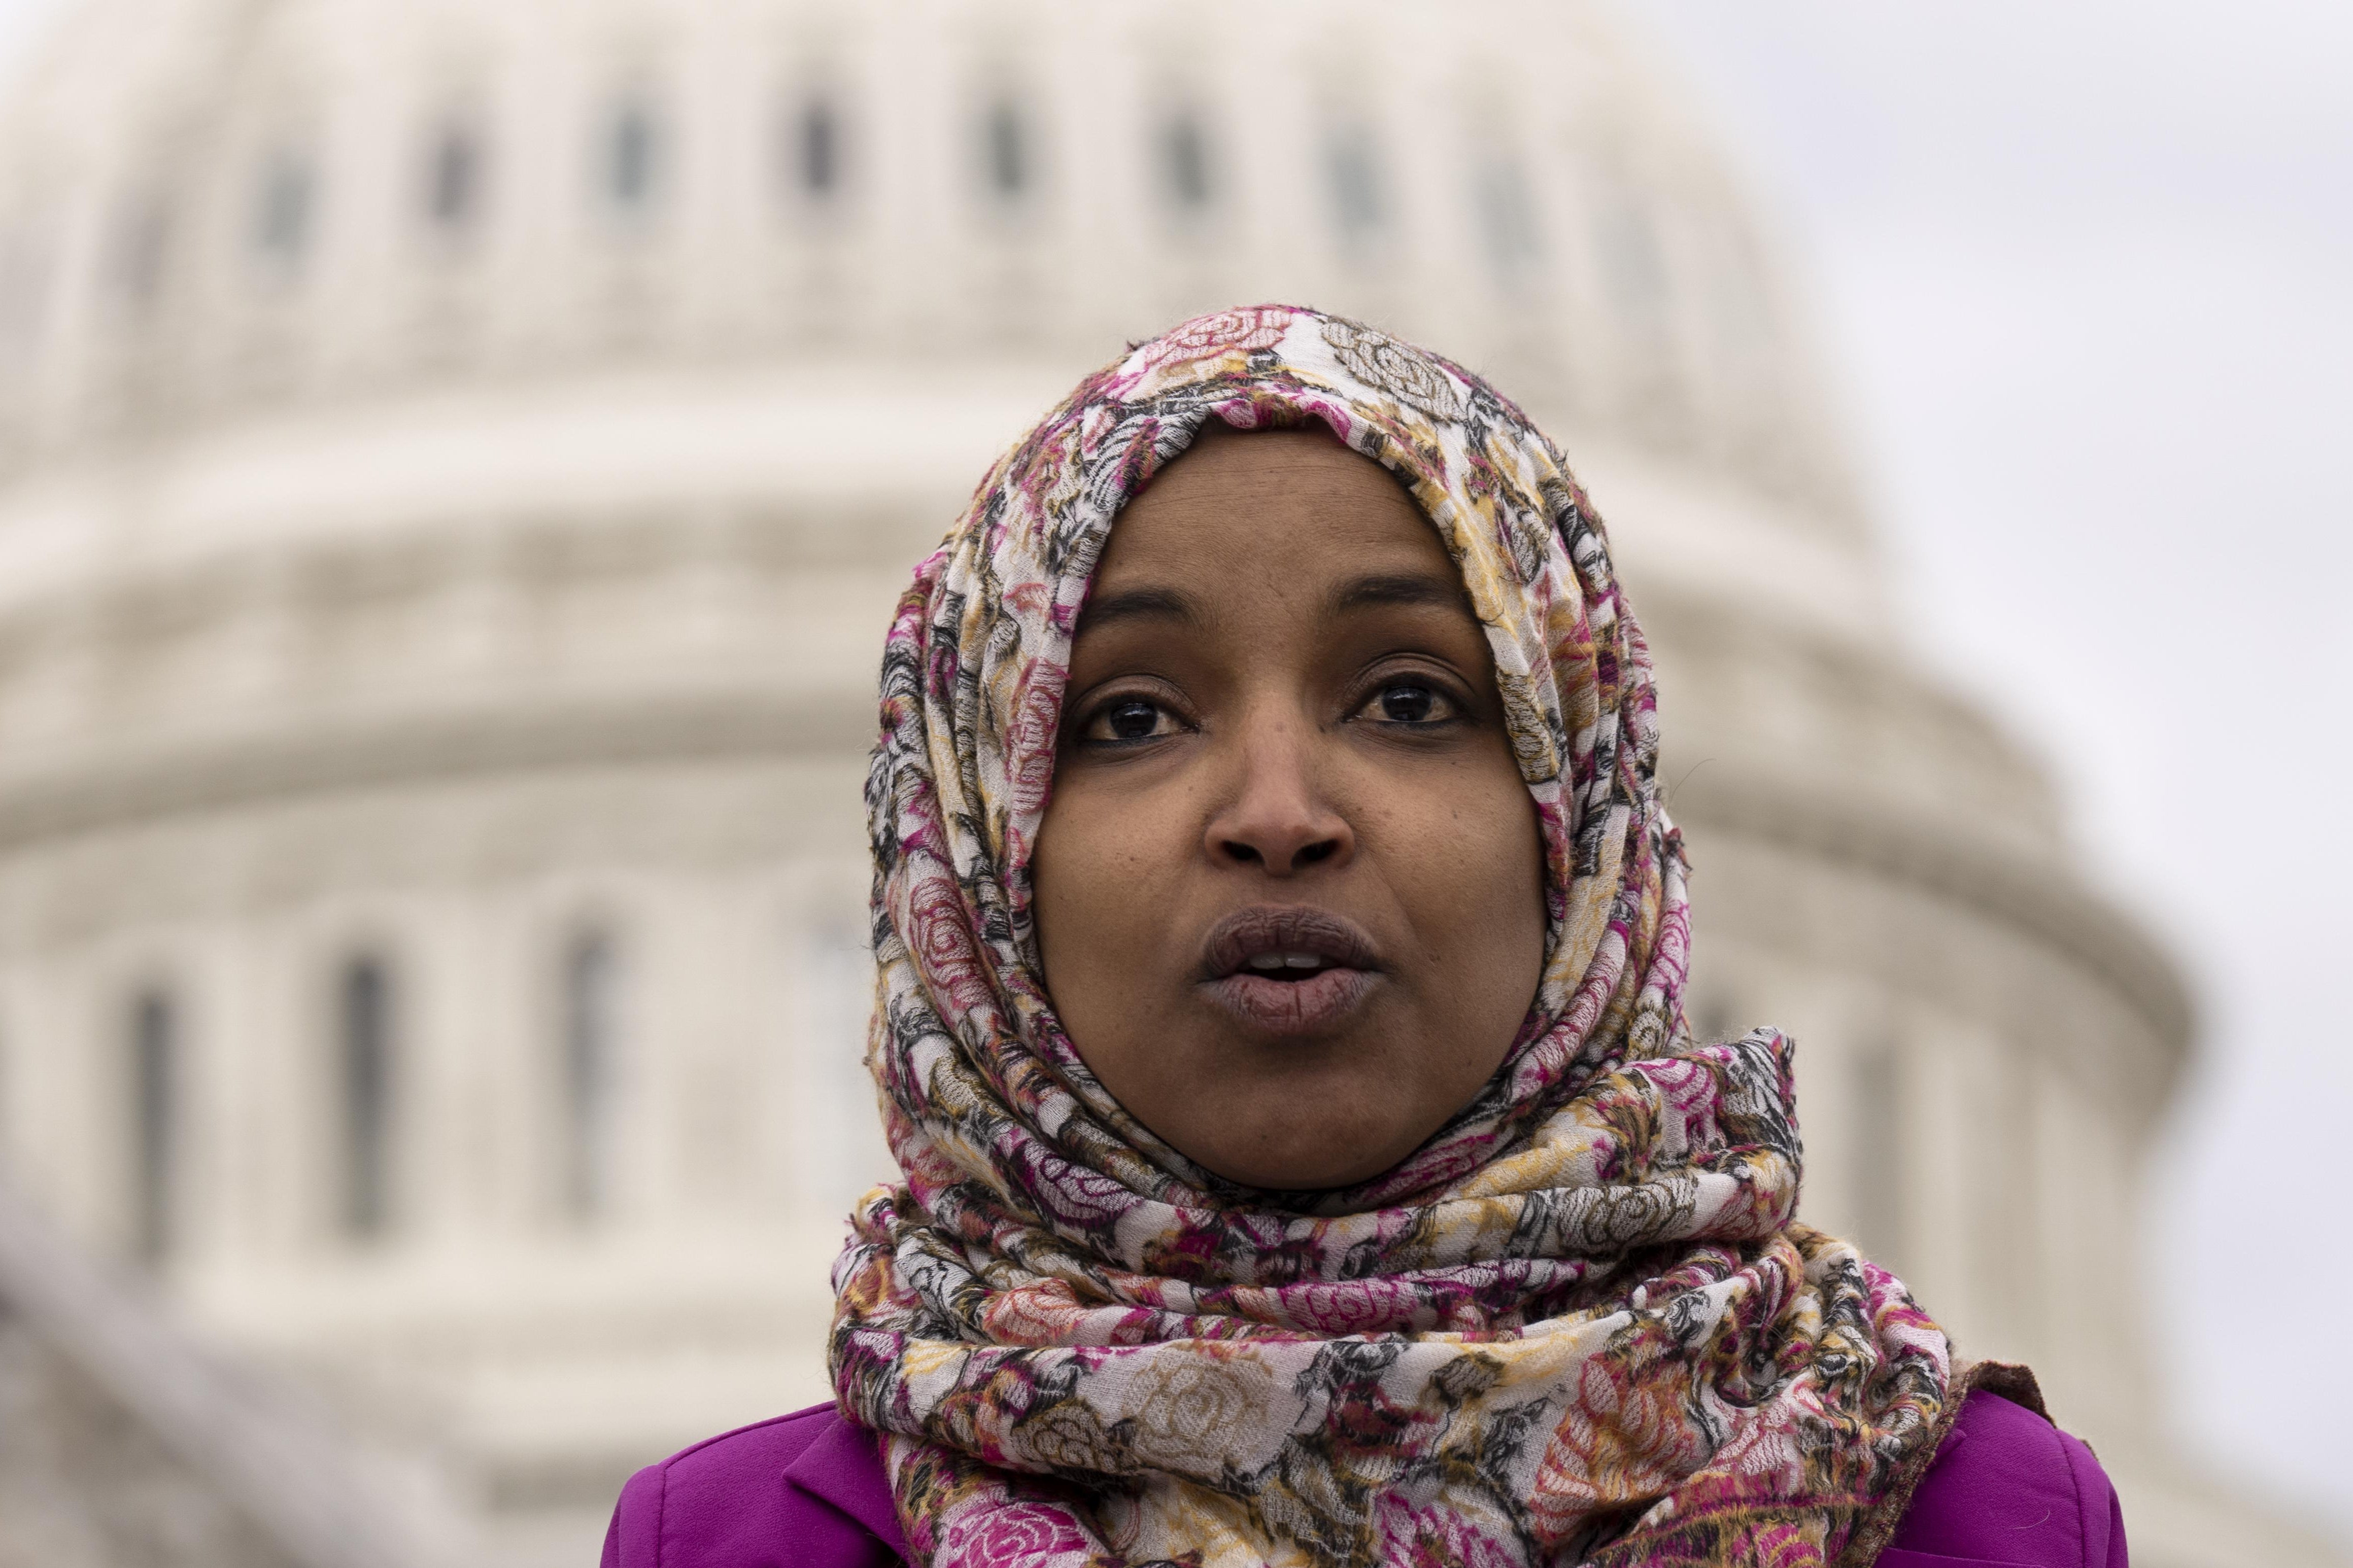 Omar speaking with the Capitol dome behind her